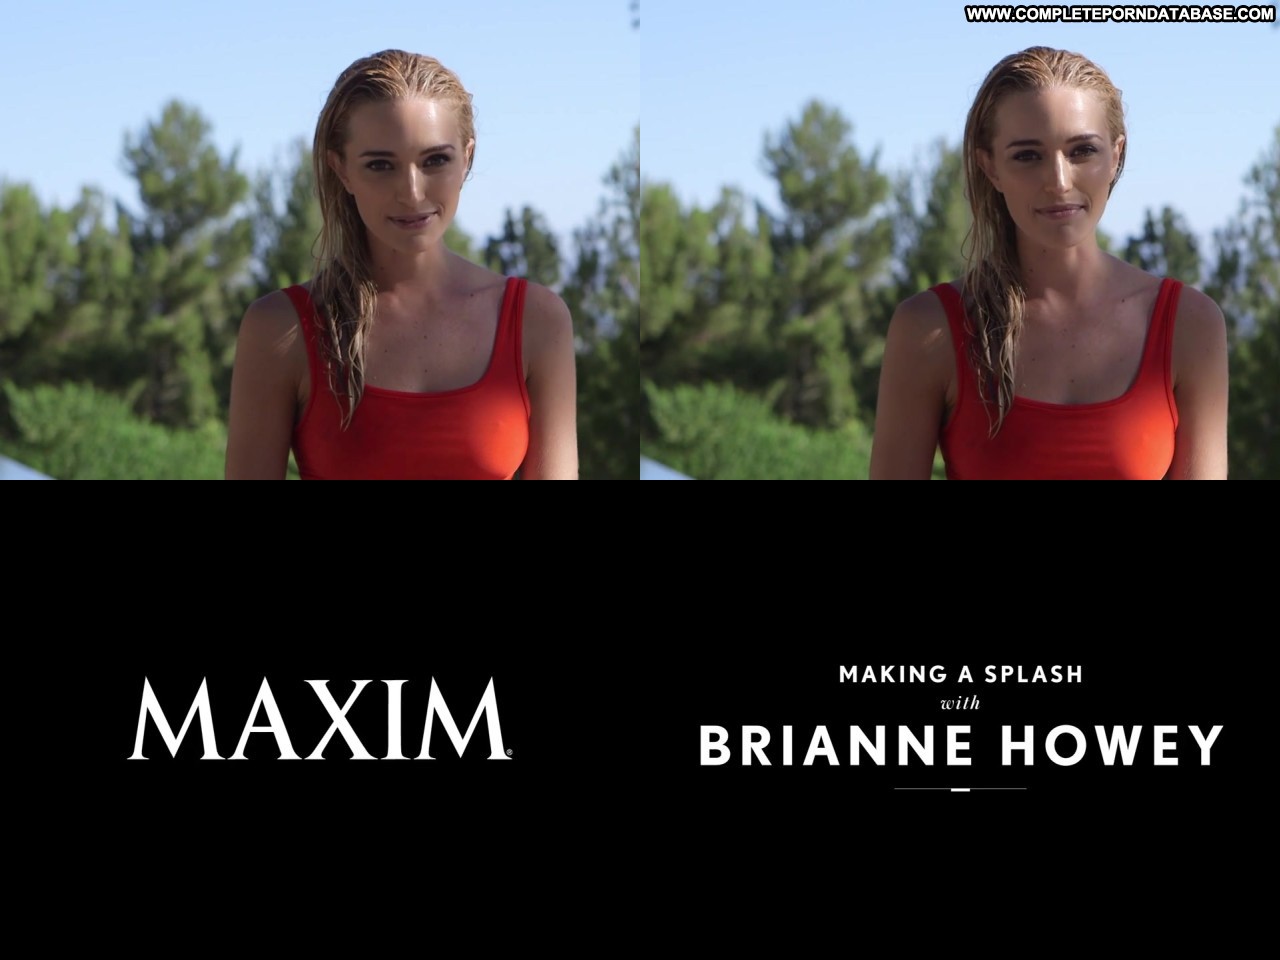 Sexy Bp Video Com - Brianne Howey Xxx Video Straight Porn Leaked Sexy Video Sex Sexy - Complete  Porn Database Pictures